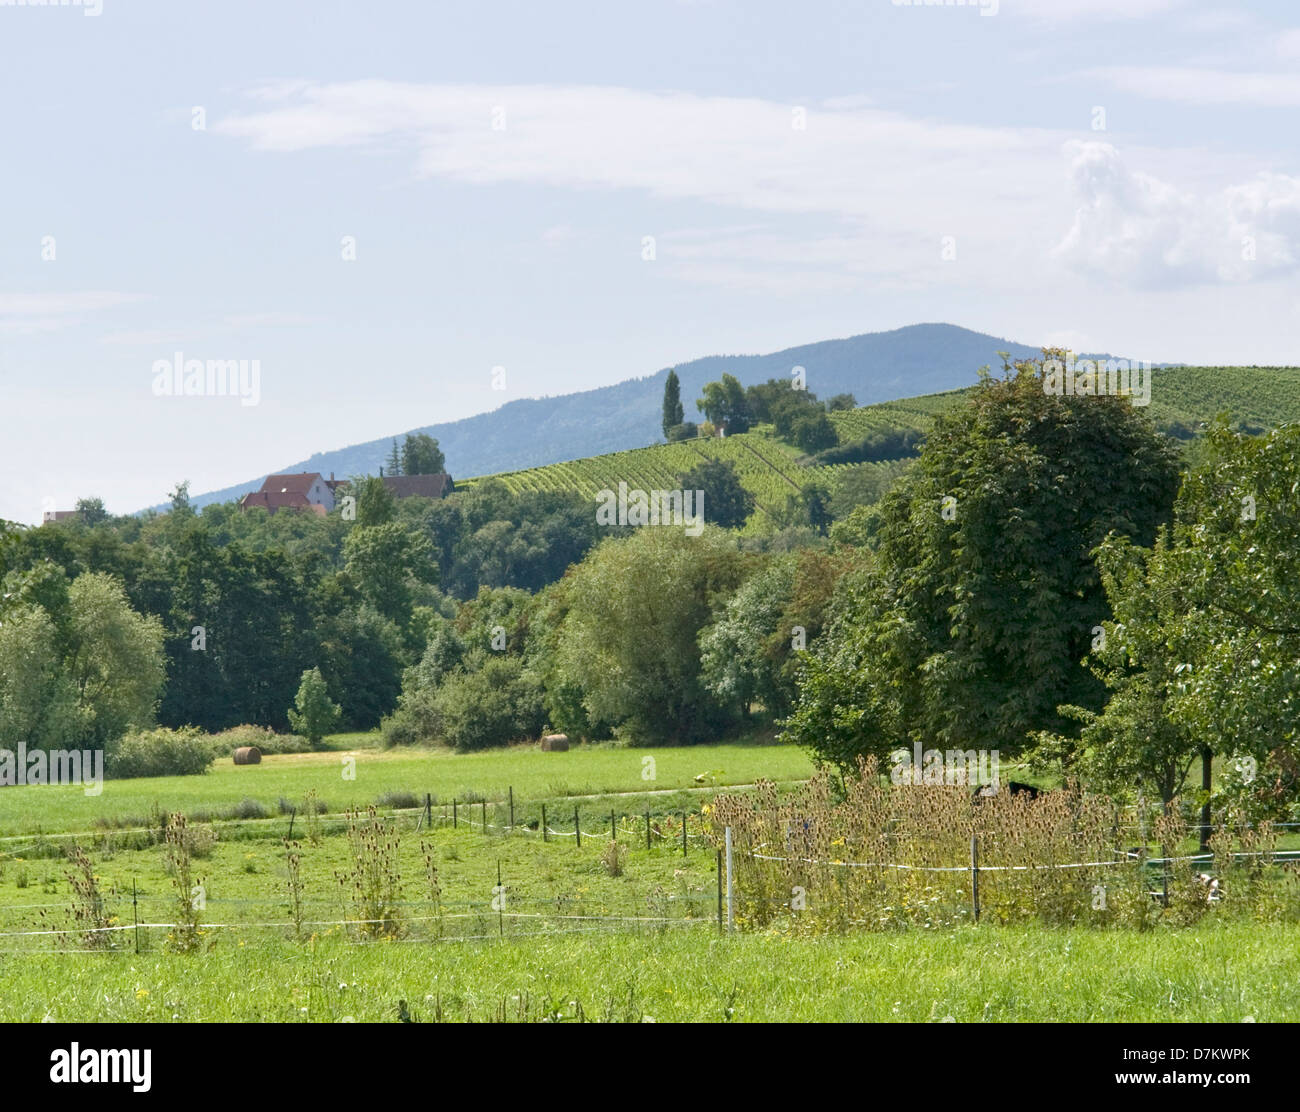 scenery around Mittelbergheim, a village of a region in France named Alsace Stock Photo